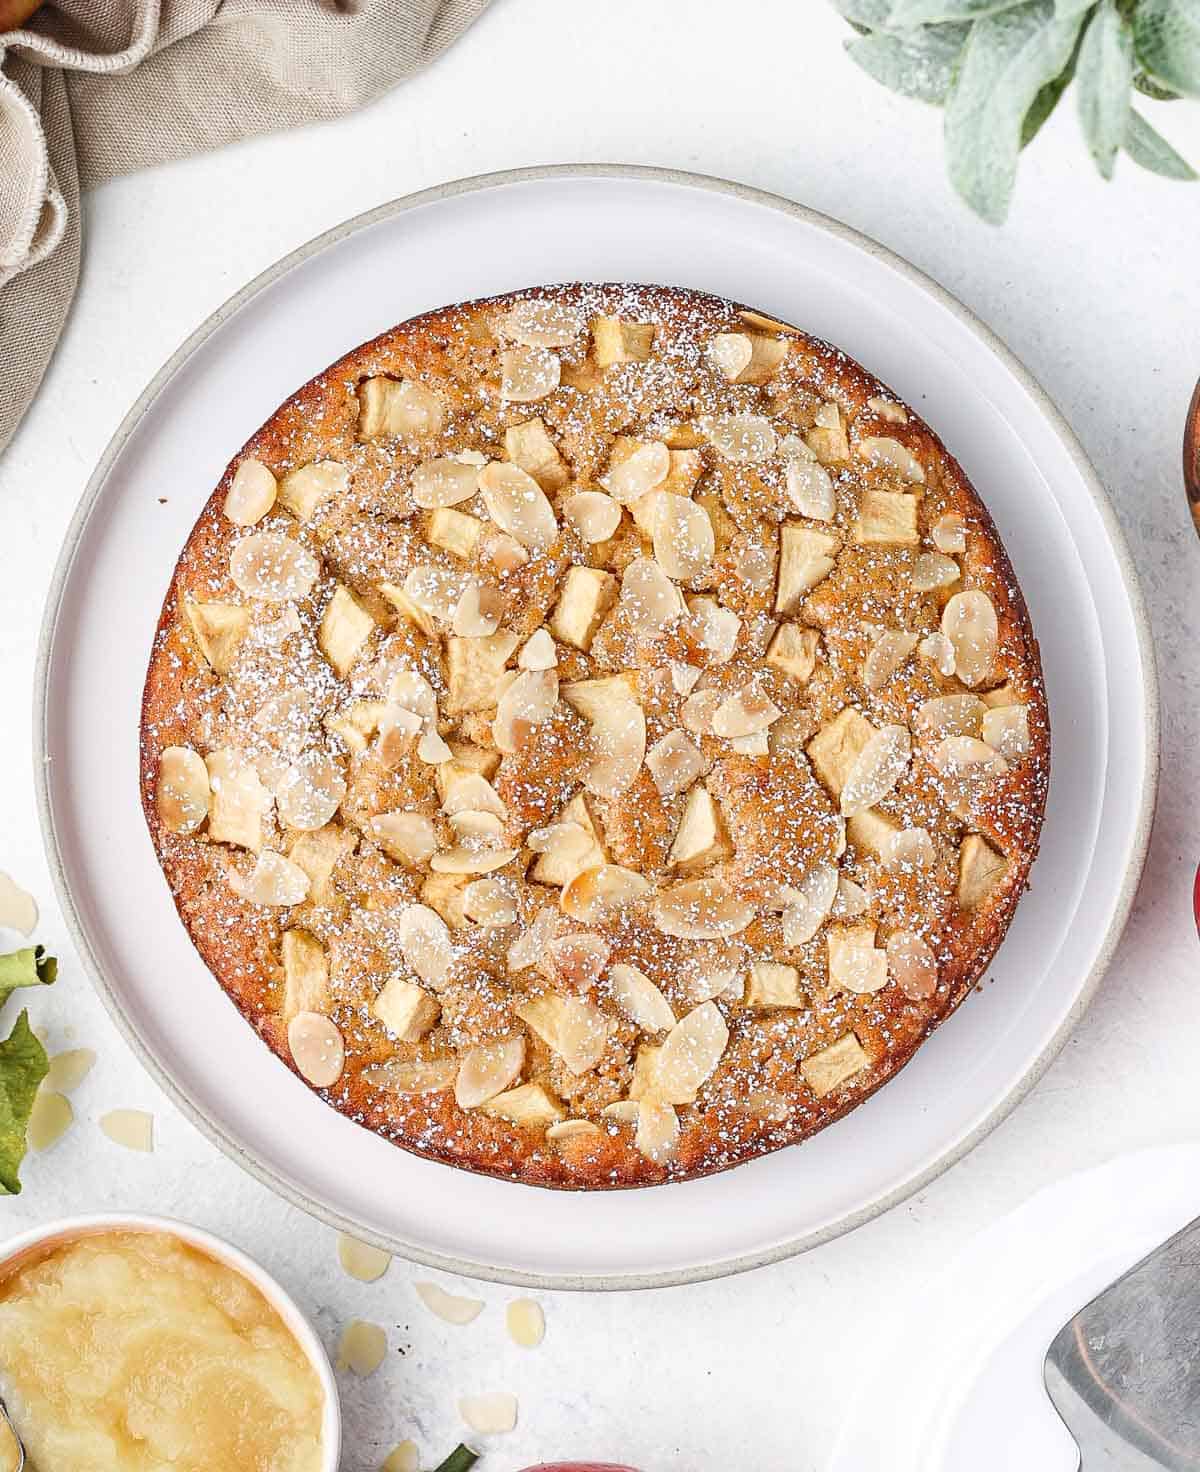 Apple cake seen from above on a large white plate.